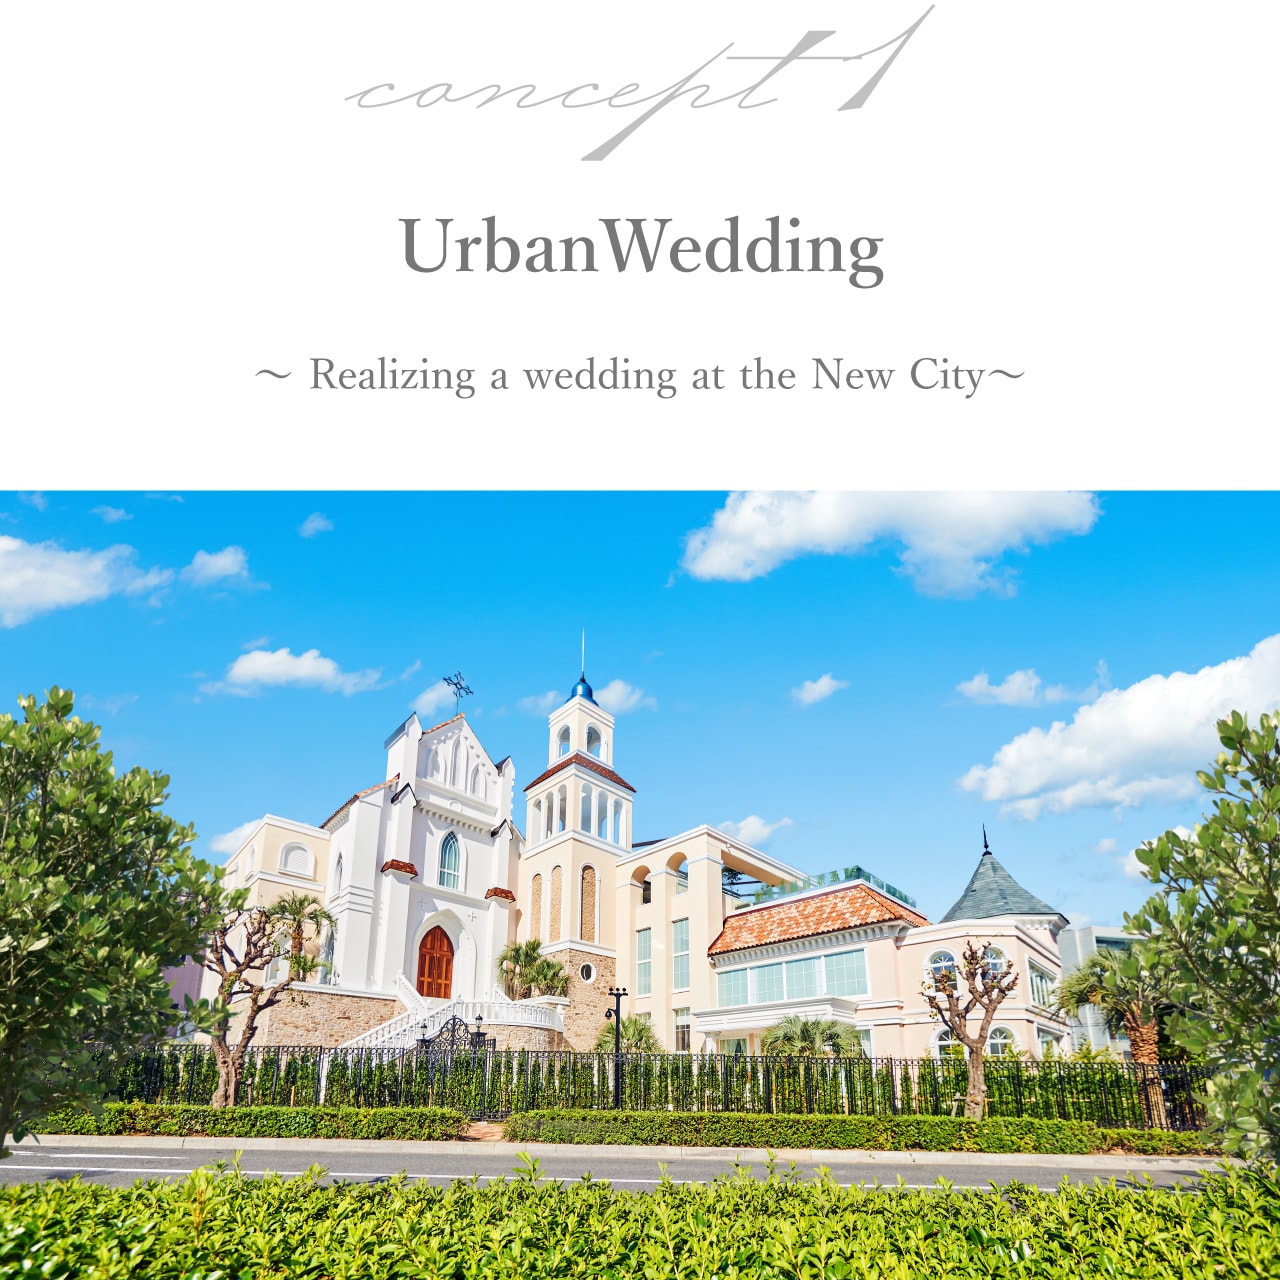 Realizing a wedding at the New City